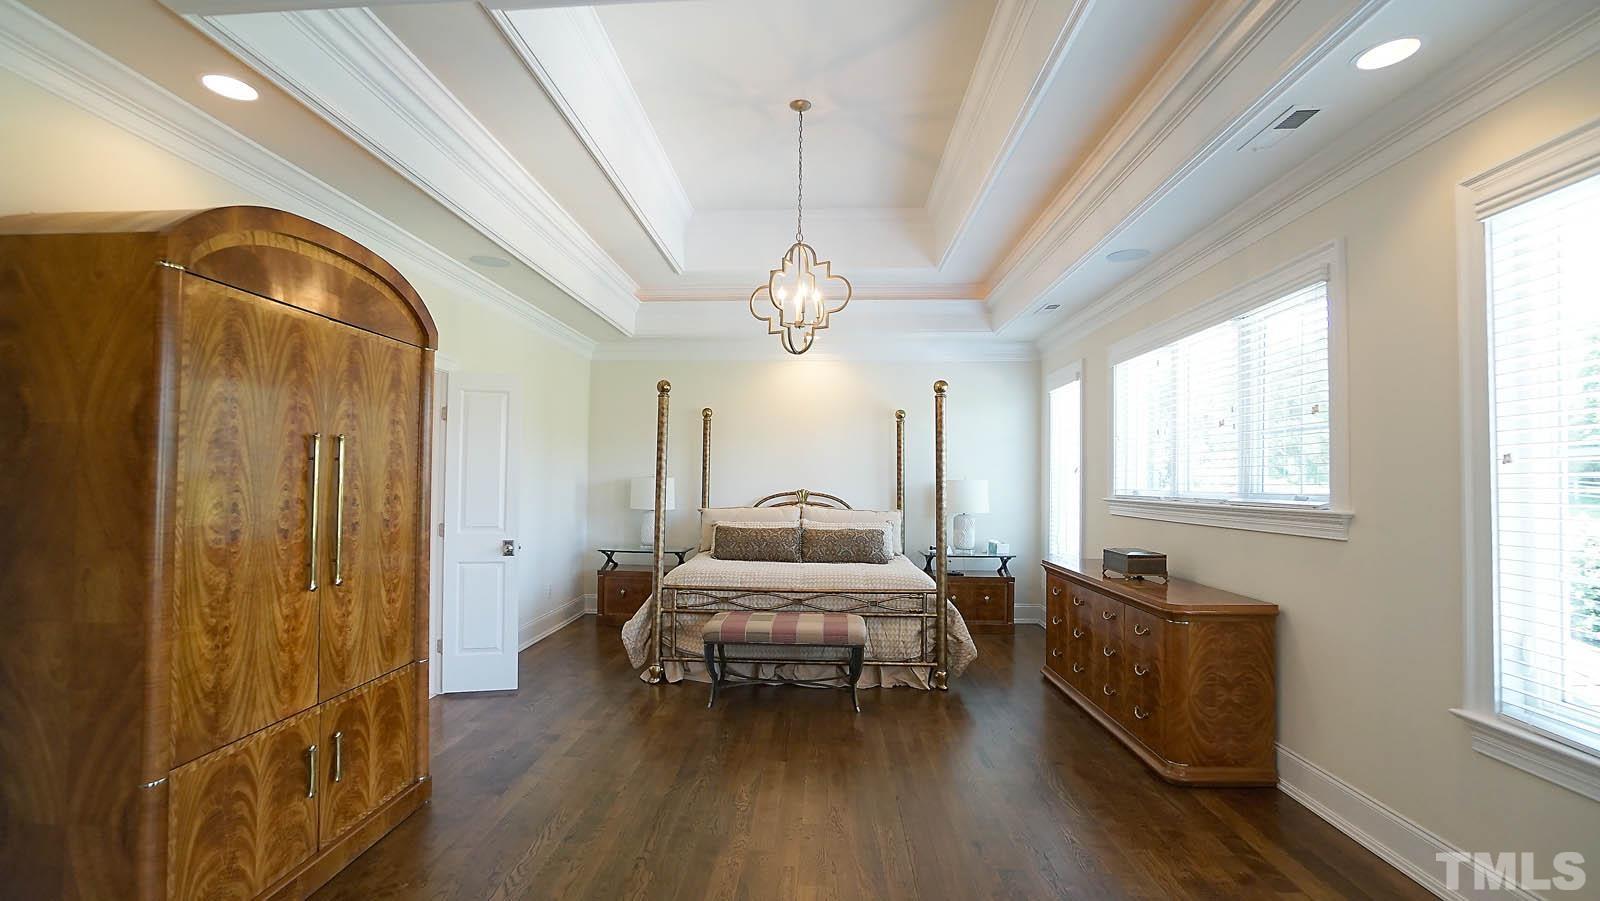 Oversized primary bedroom with sitting area, amazing custom closet with island and Hollywood bath with dual vanities and walk in tiled shower.